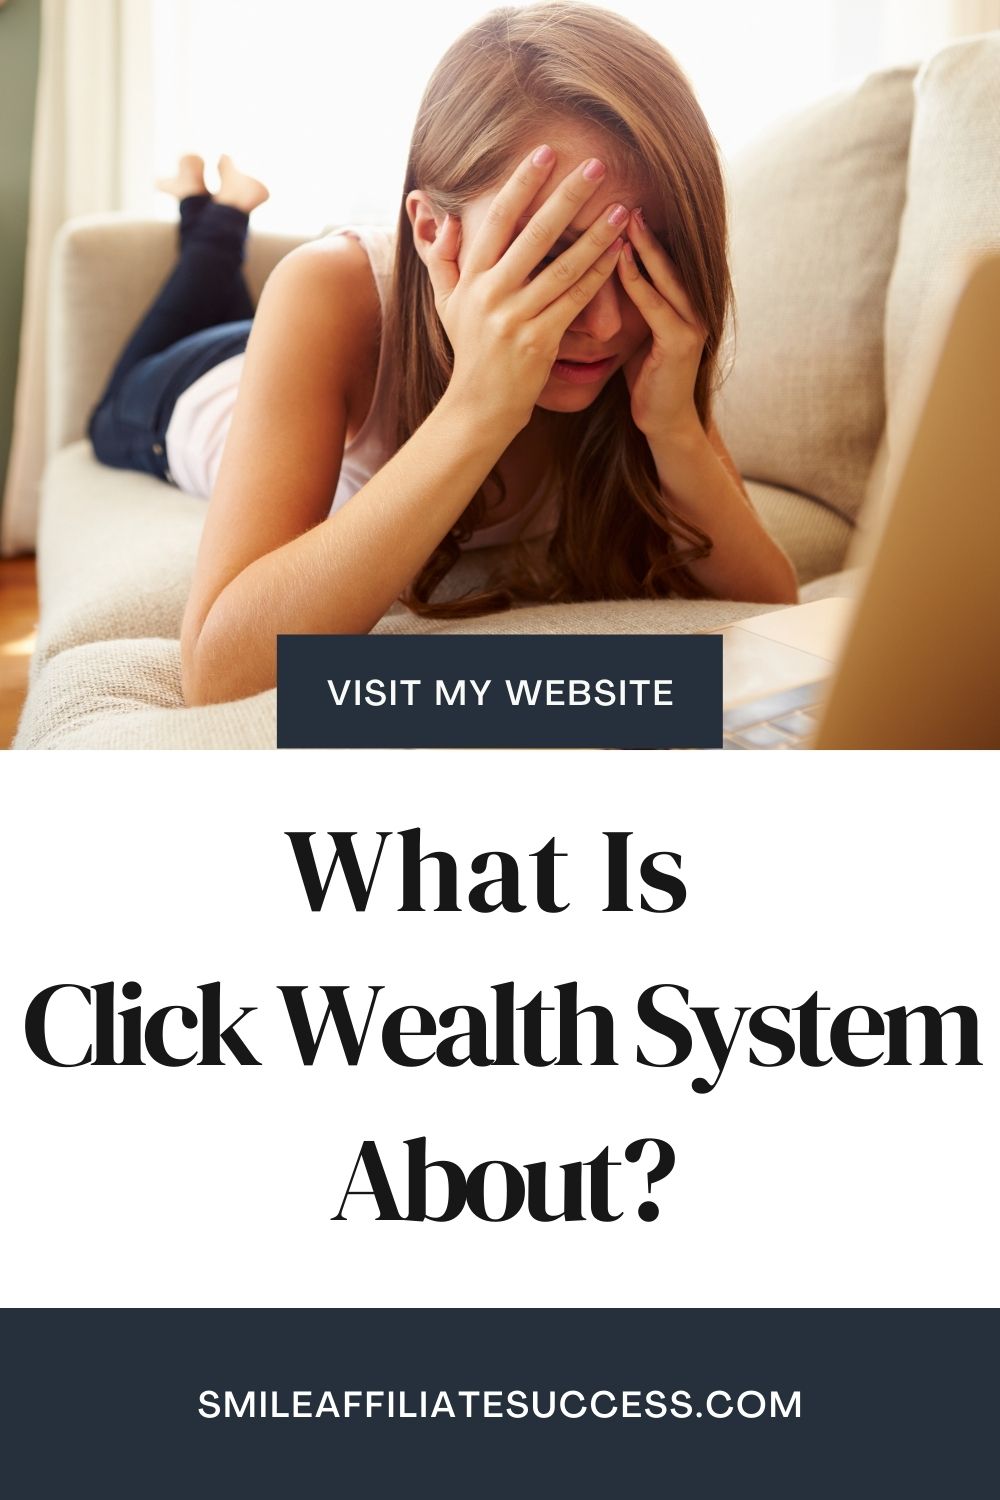 What Is Click Wealth System About?